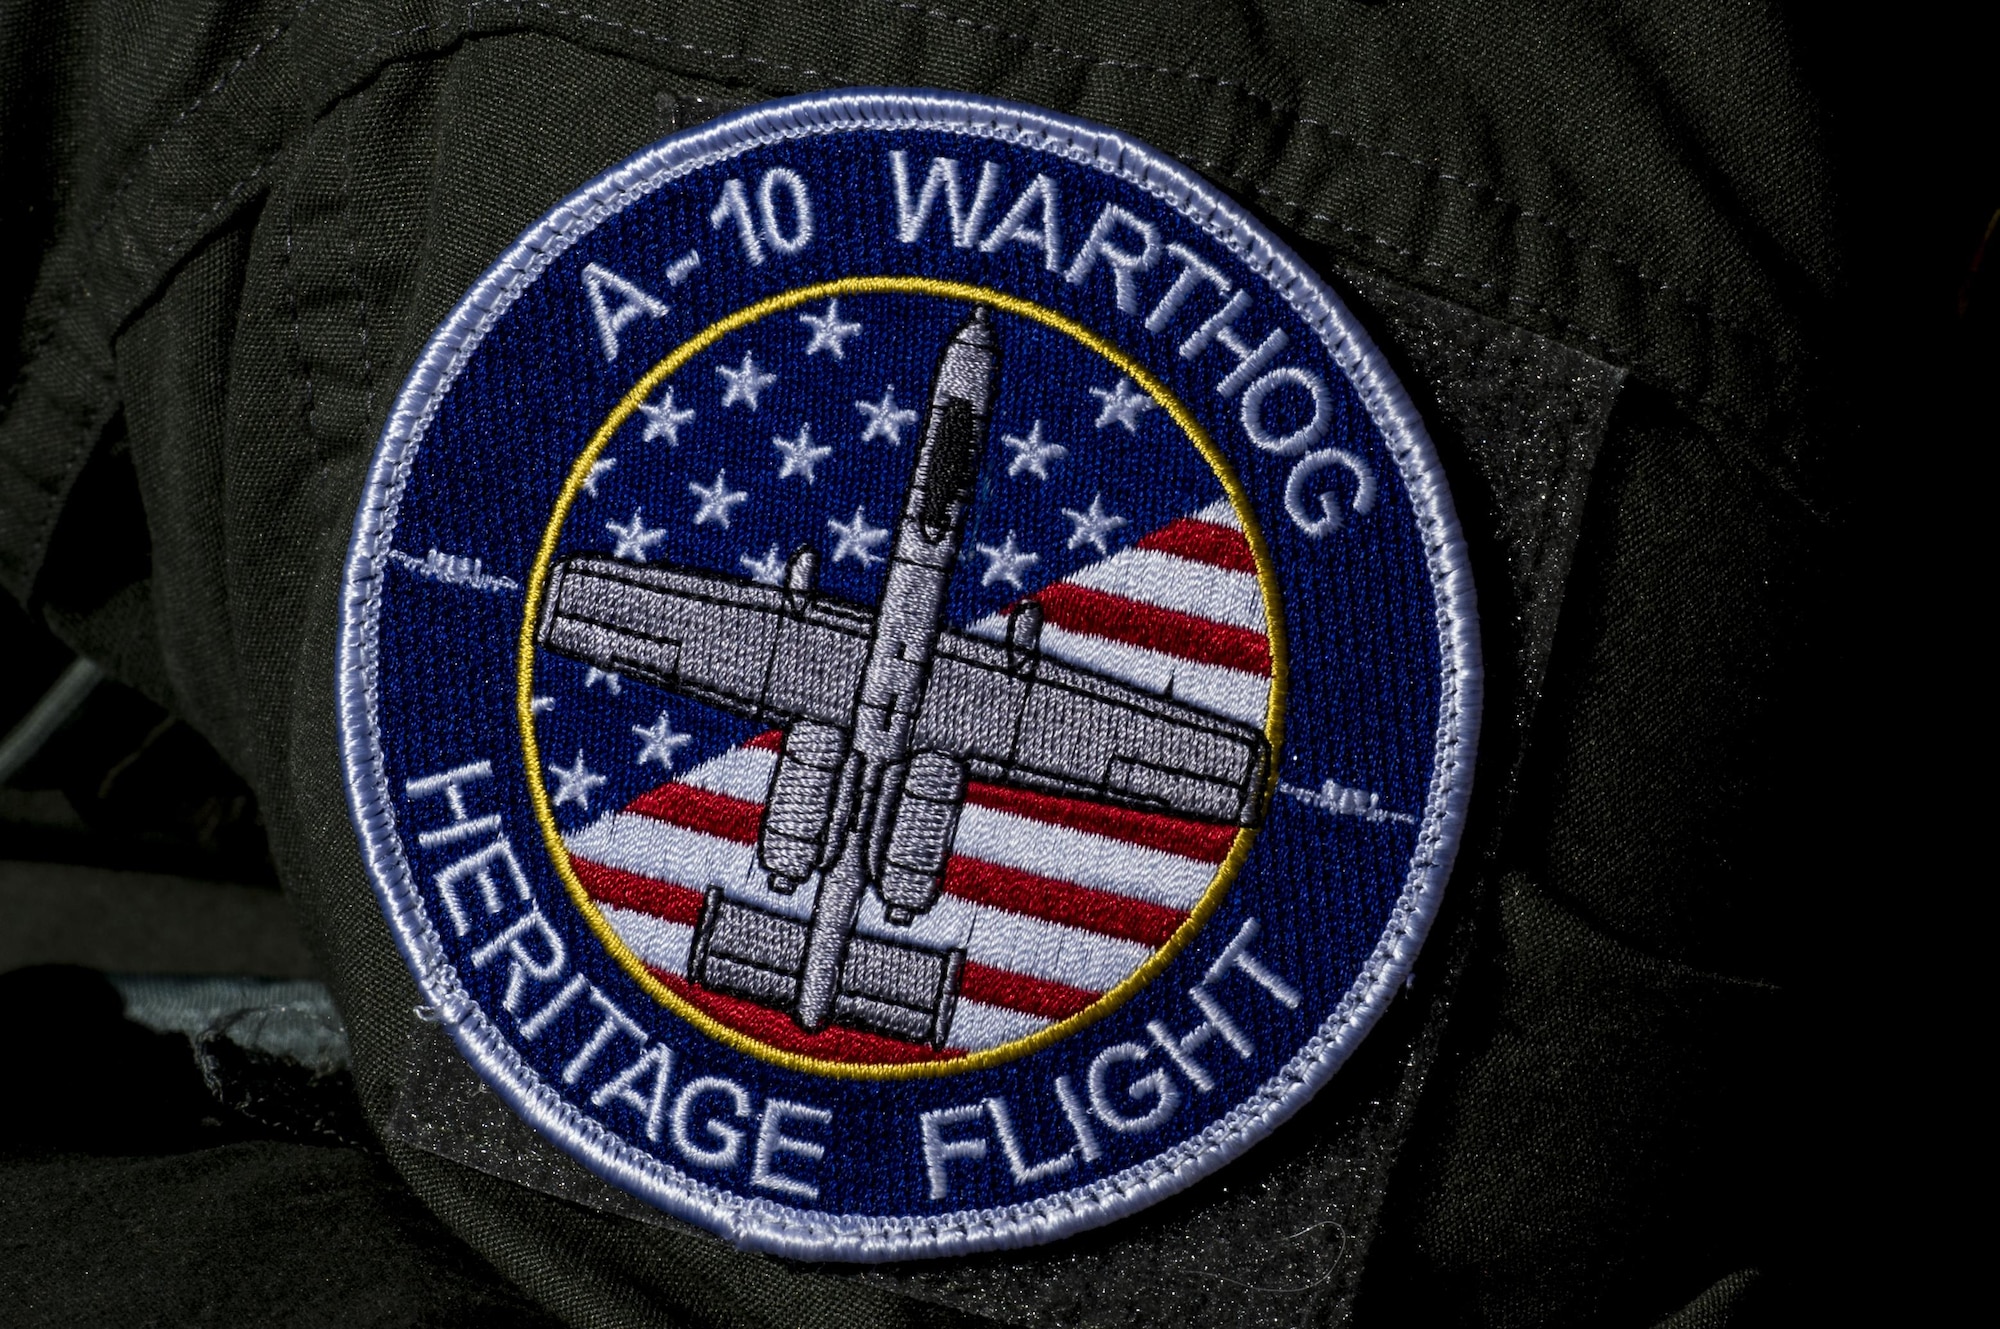 The A-10 Heritage Flight patch rests on the shoulder of Maj. Joseph Morrin, A-10 Heritage Flight Team pilot, during the Naval Air Station Jacksonville Air Show, Nov. 2, 2017, at NAS Jacksonville, Fla. The U.S. Air Force Heritage Flight program showcases past, present and future aircraft to spectators at air shows around the world. (U.S. Air Force photo by Staff Sgt. Eric Summers Jr.)